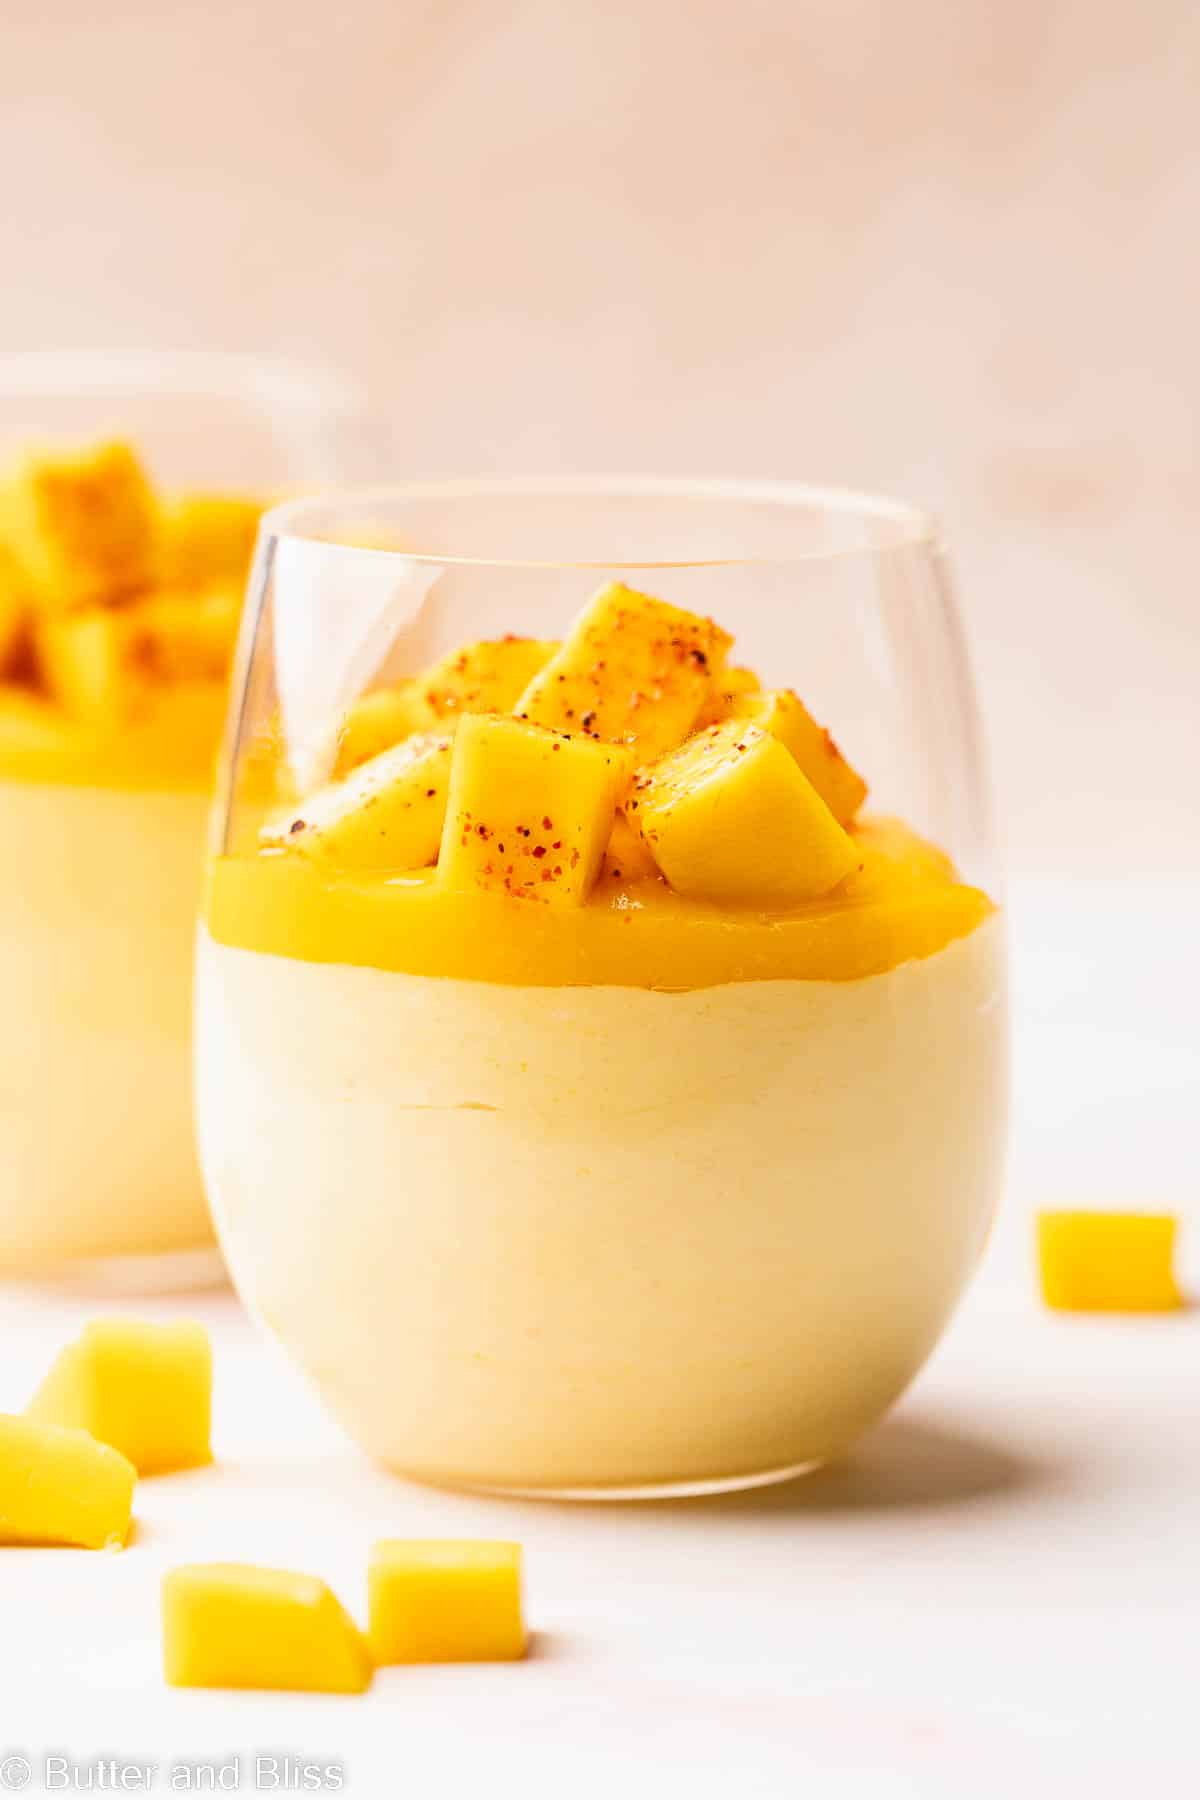 Tropical mango mousse with layers of mango puree and mango chunks in a glass.